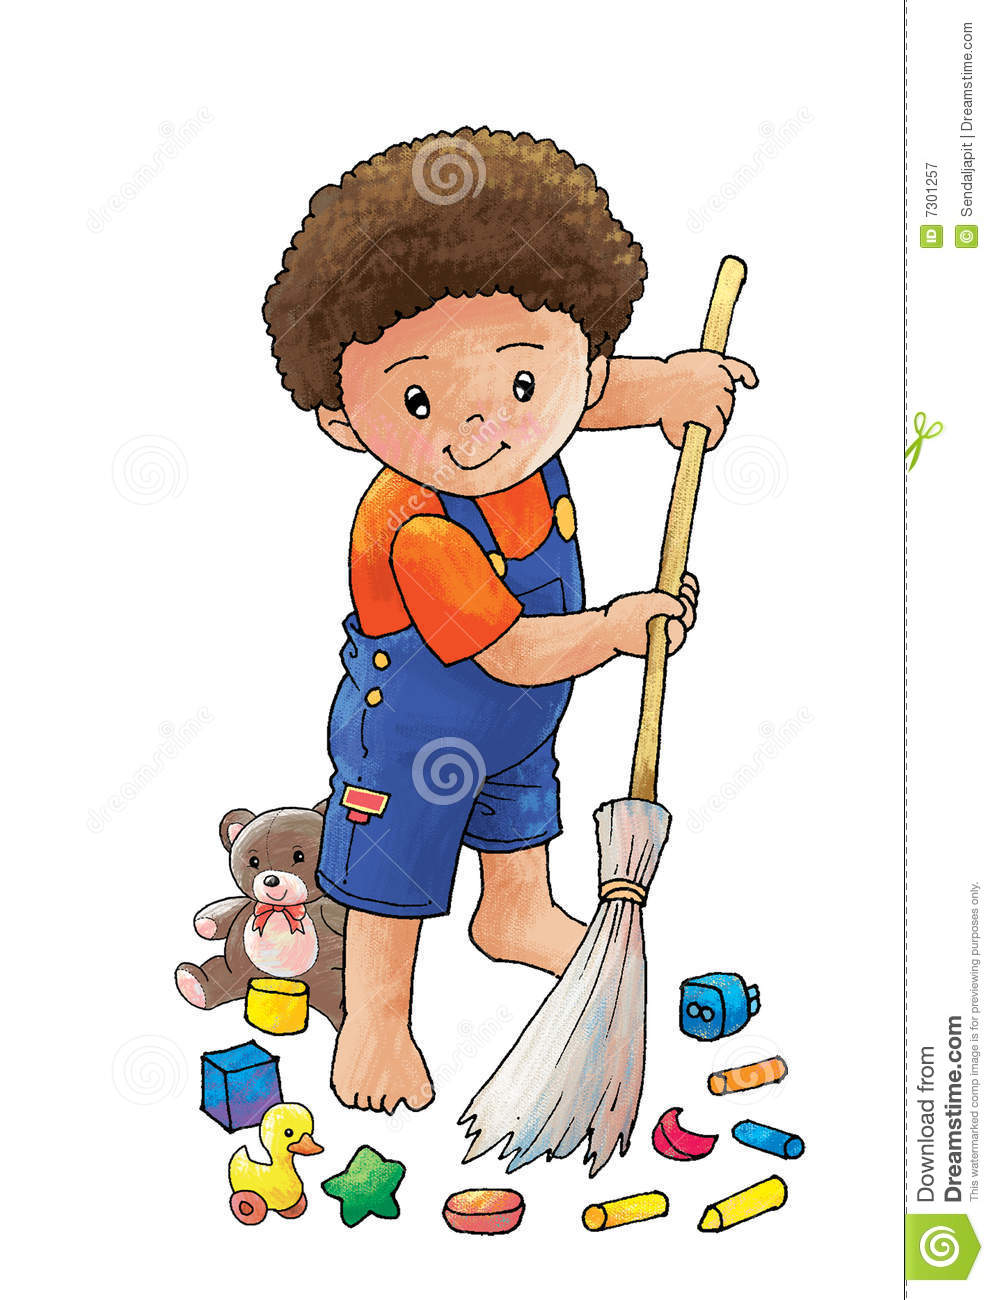 Sweep The Floor Royalty Free Stock Photography   Image  7301257